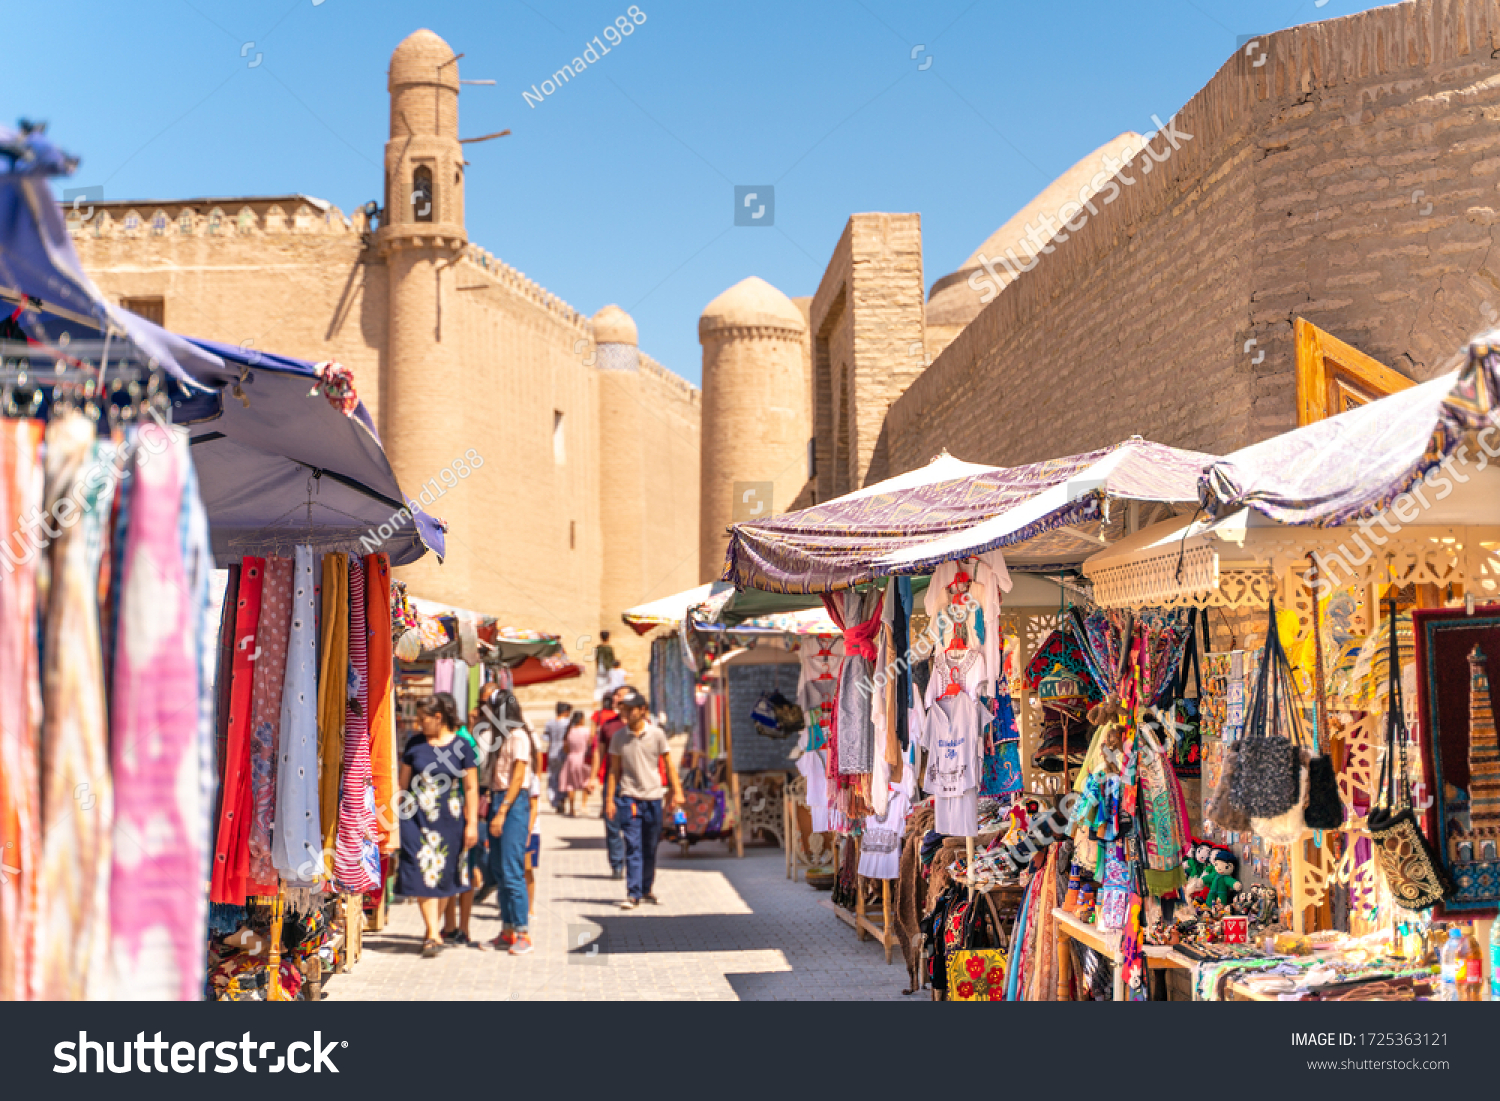 The view o famous bazaar street in Khiva #1725363121